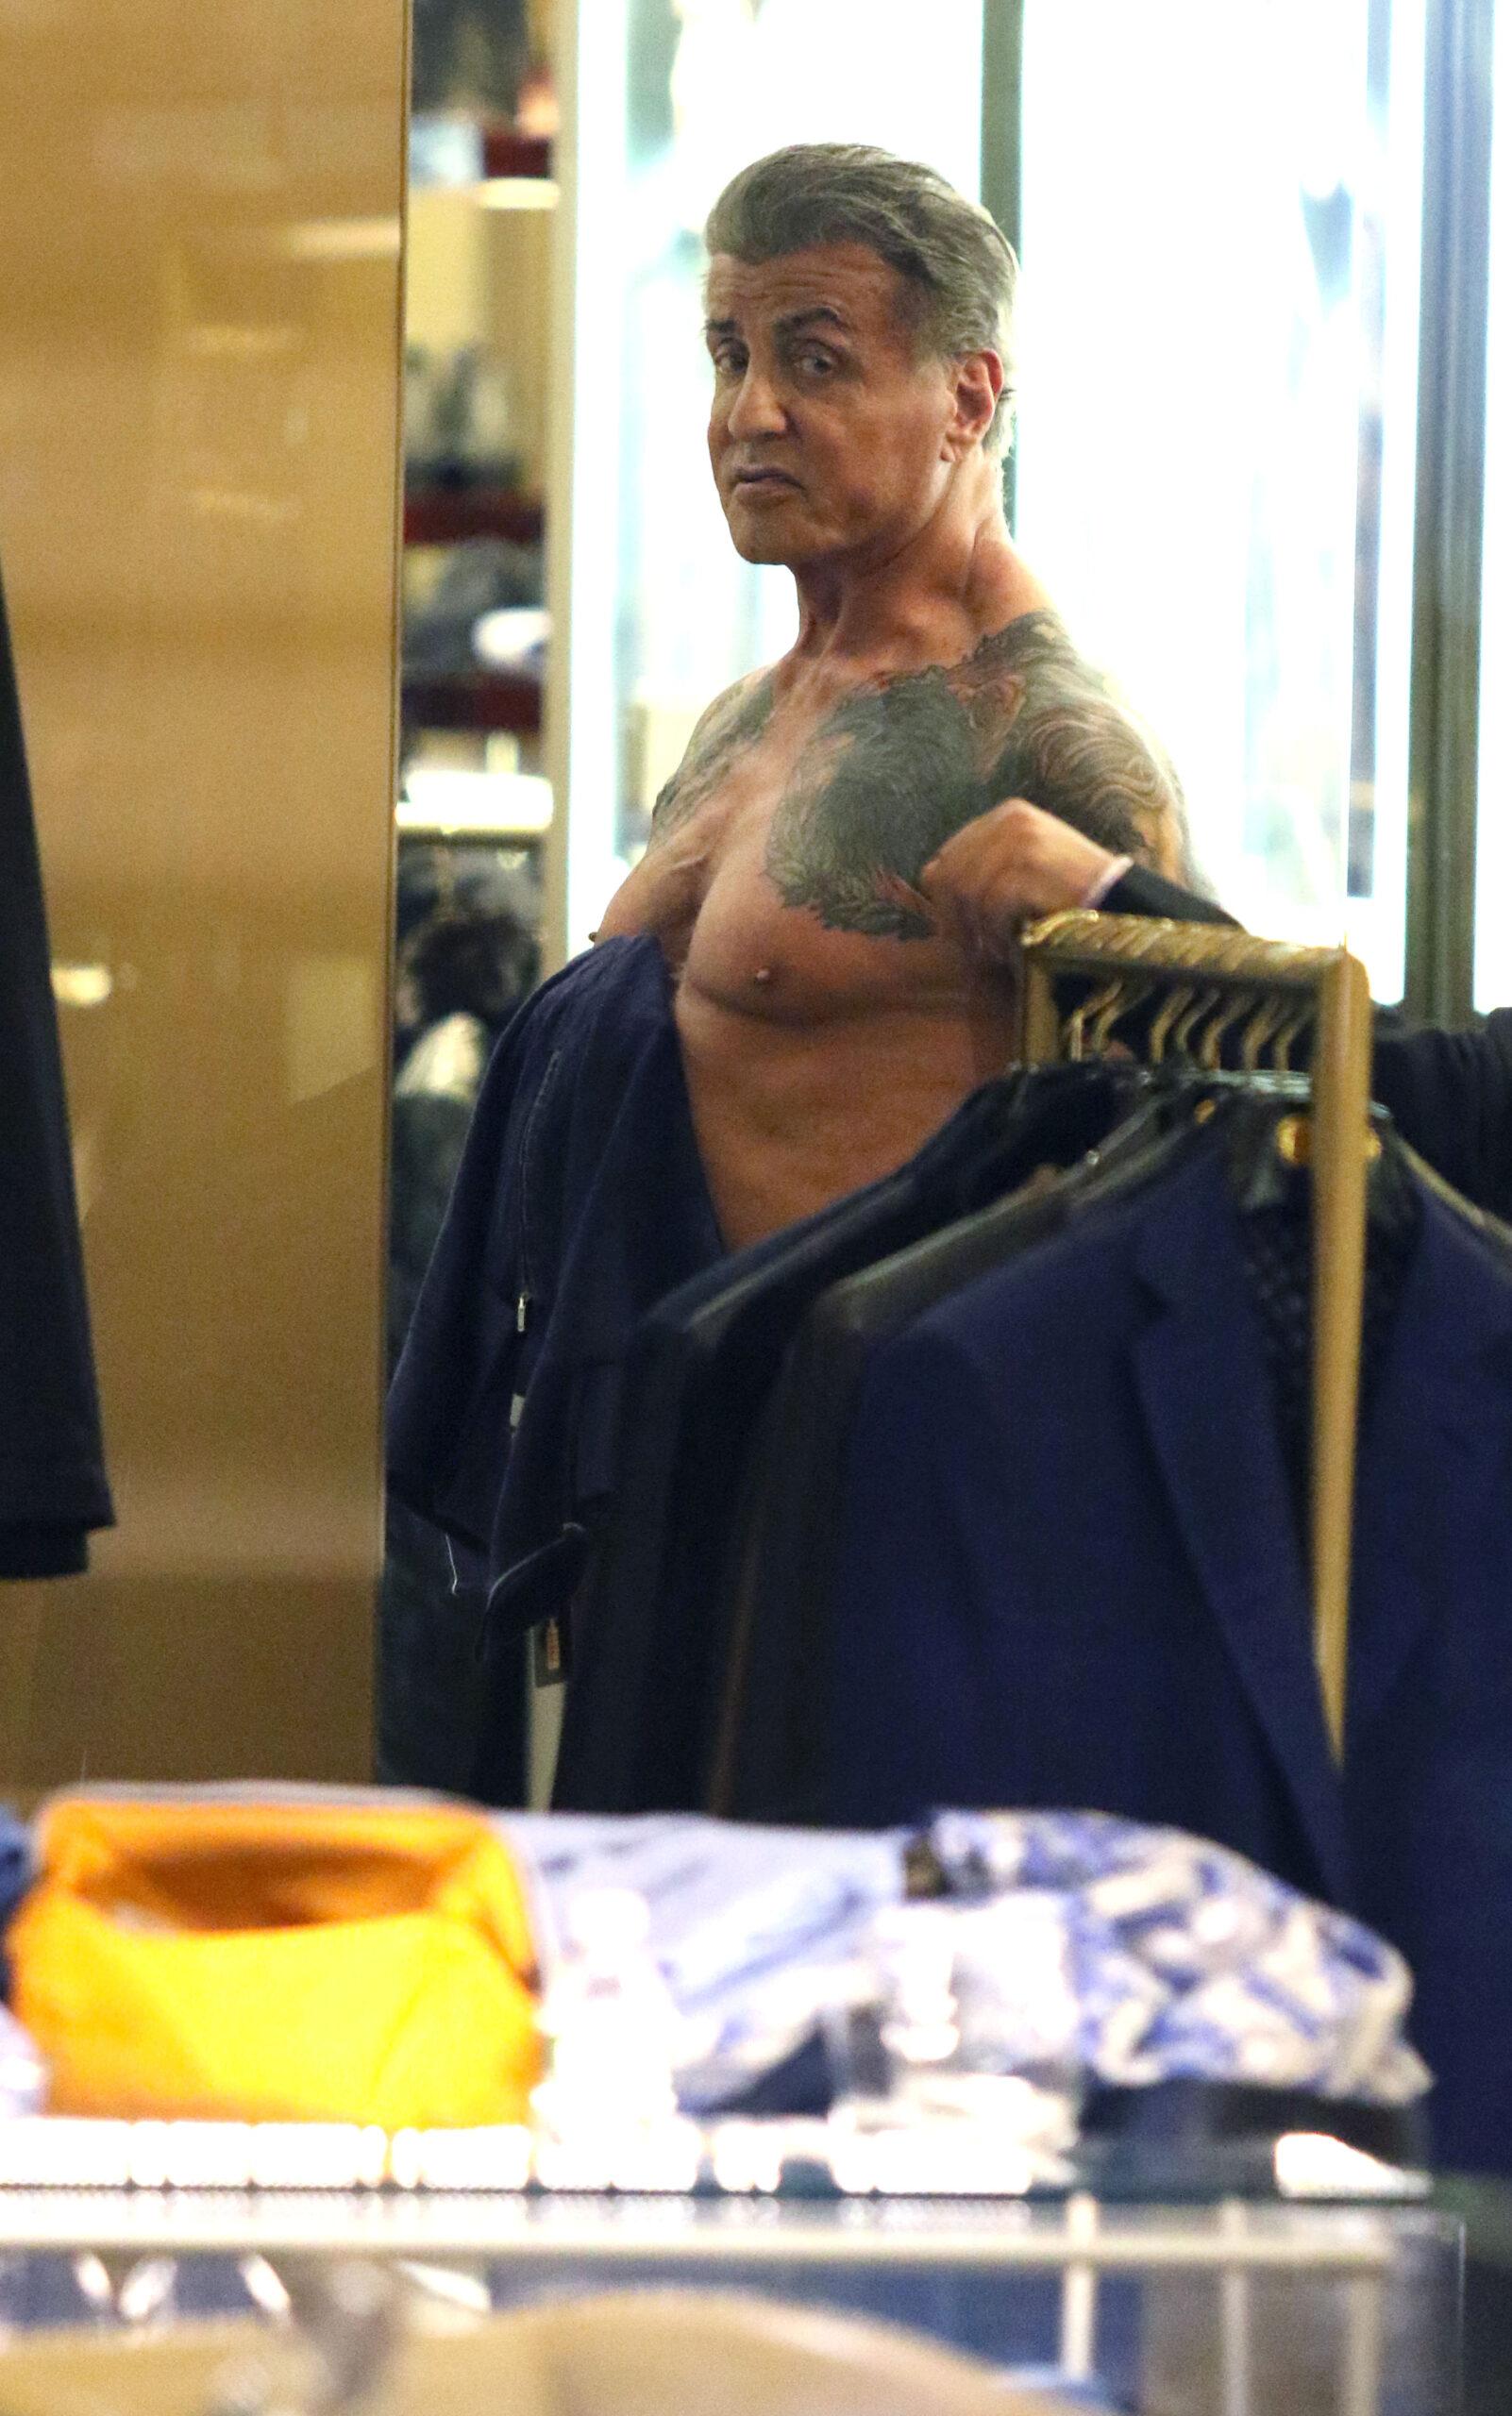 Sylvester Stallone goes shirtless as he shows off muscular physique and heavily tattooed back and chest while shopping in New York City.